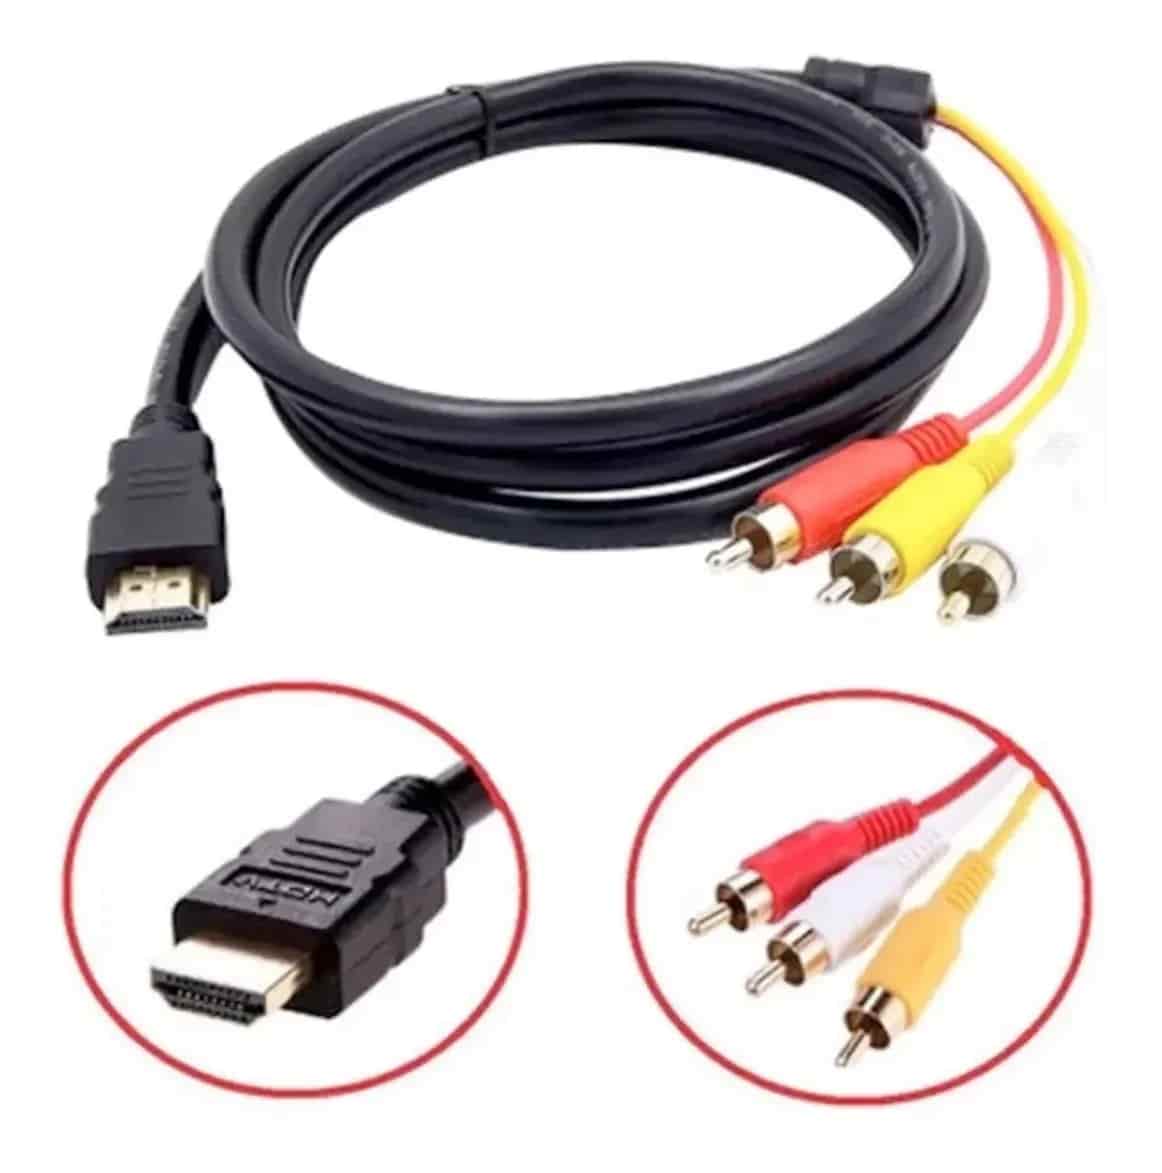 Cable Hdmi a Rca 1,5 Mts – One Way Store